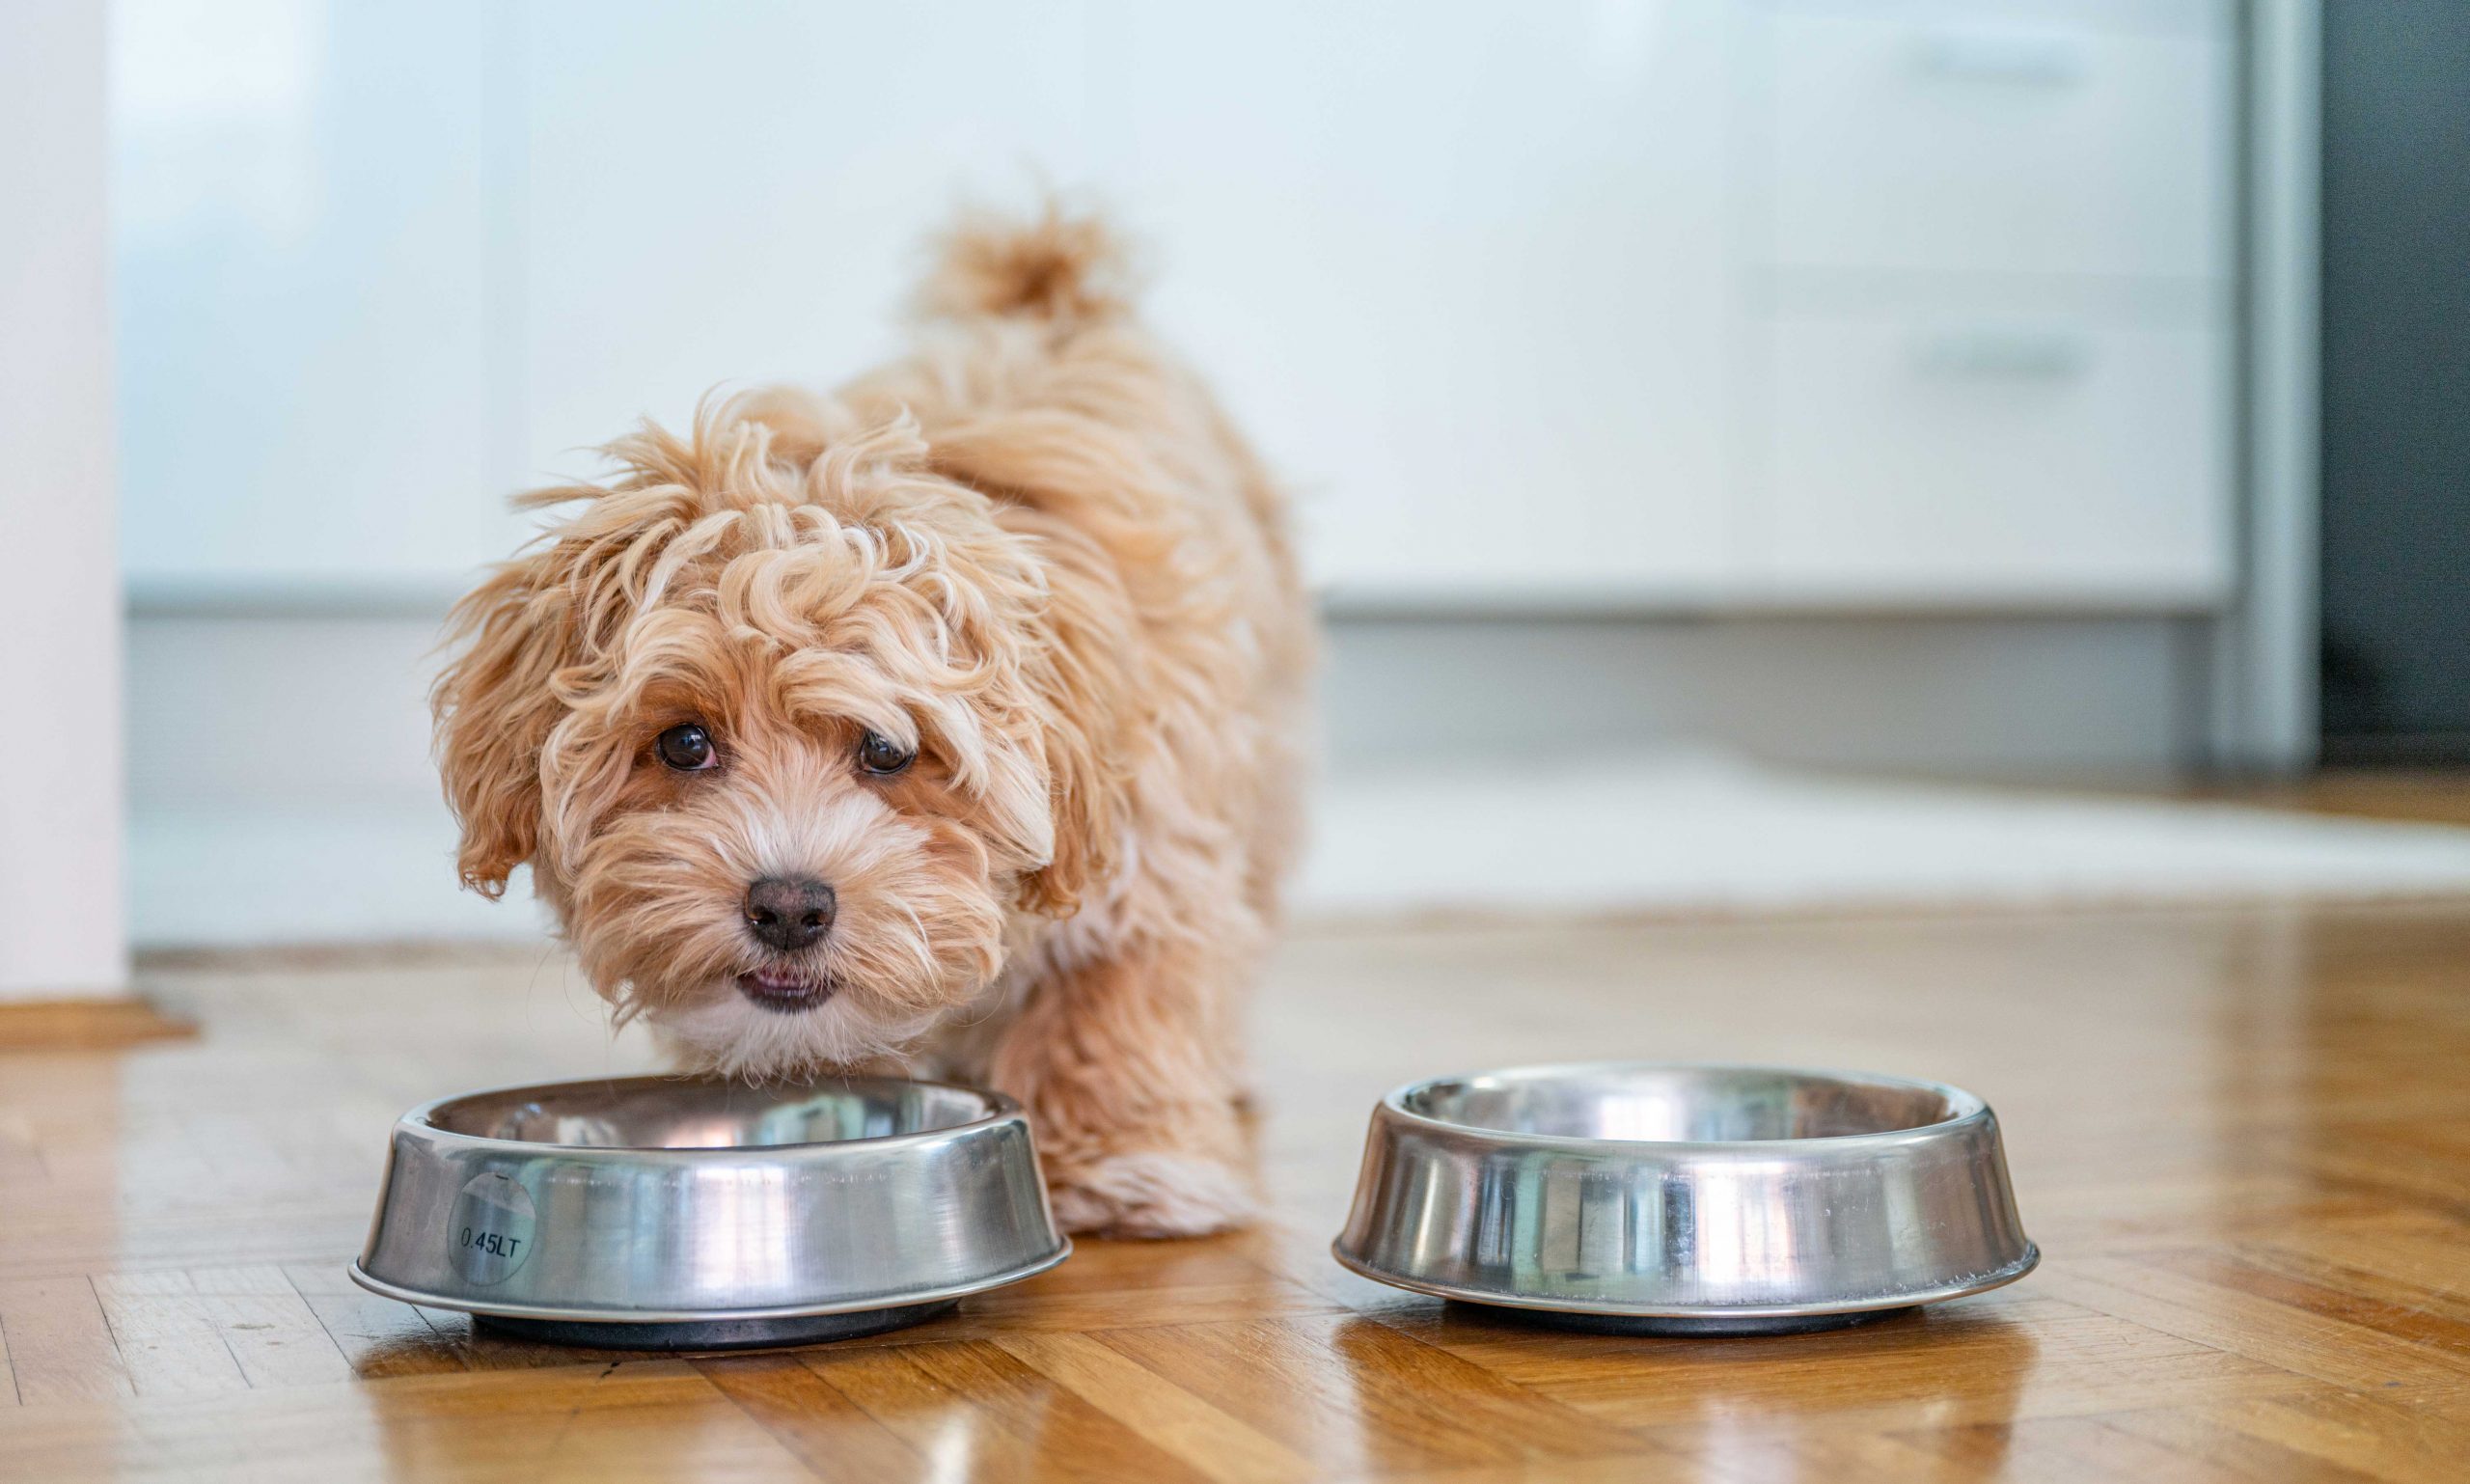 how to comfort a dog with cancer: dog with food bowl